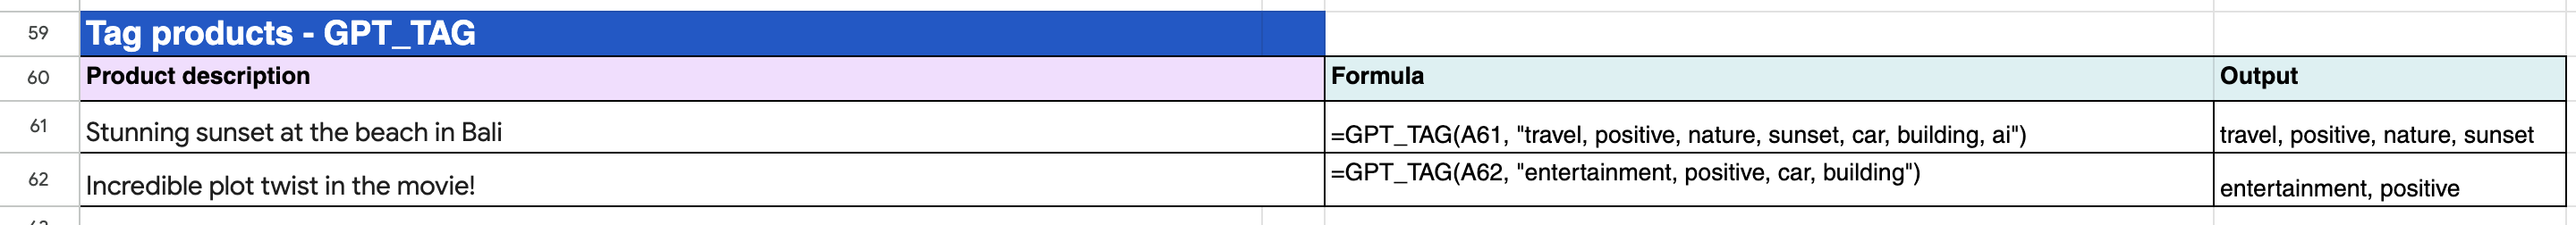 GPT_TAG helps to categorize and classify text